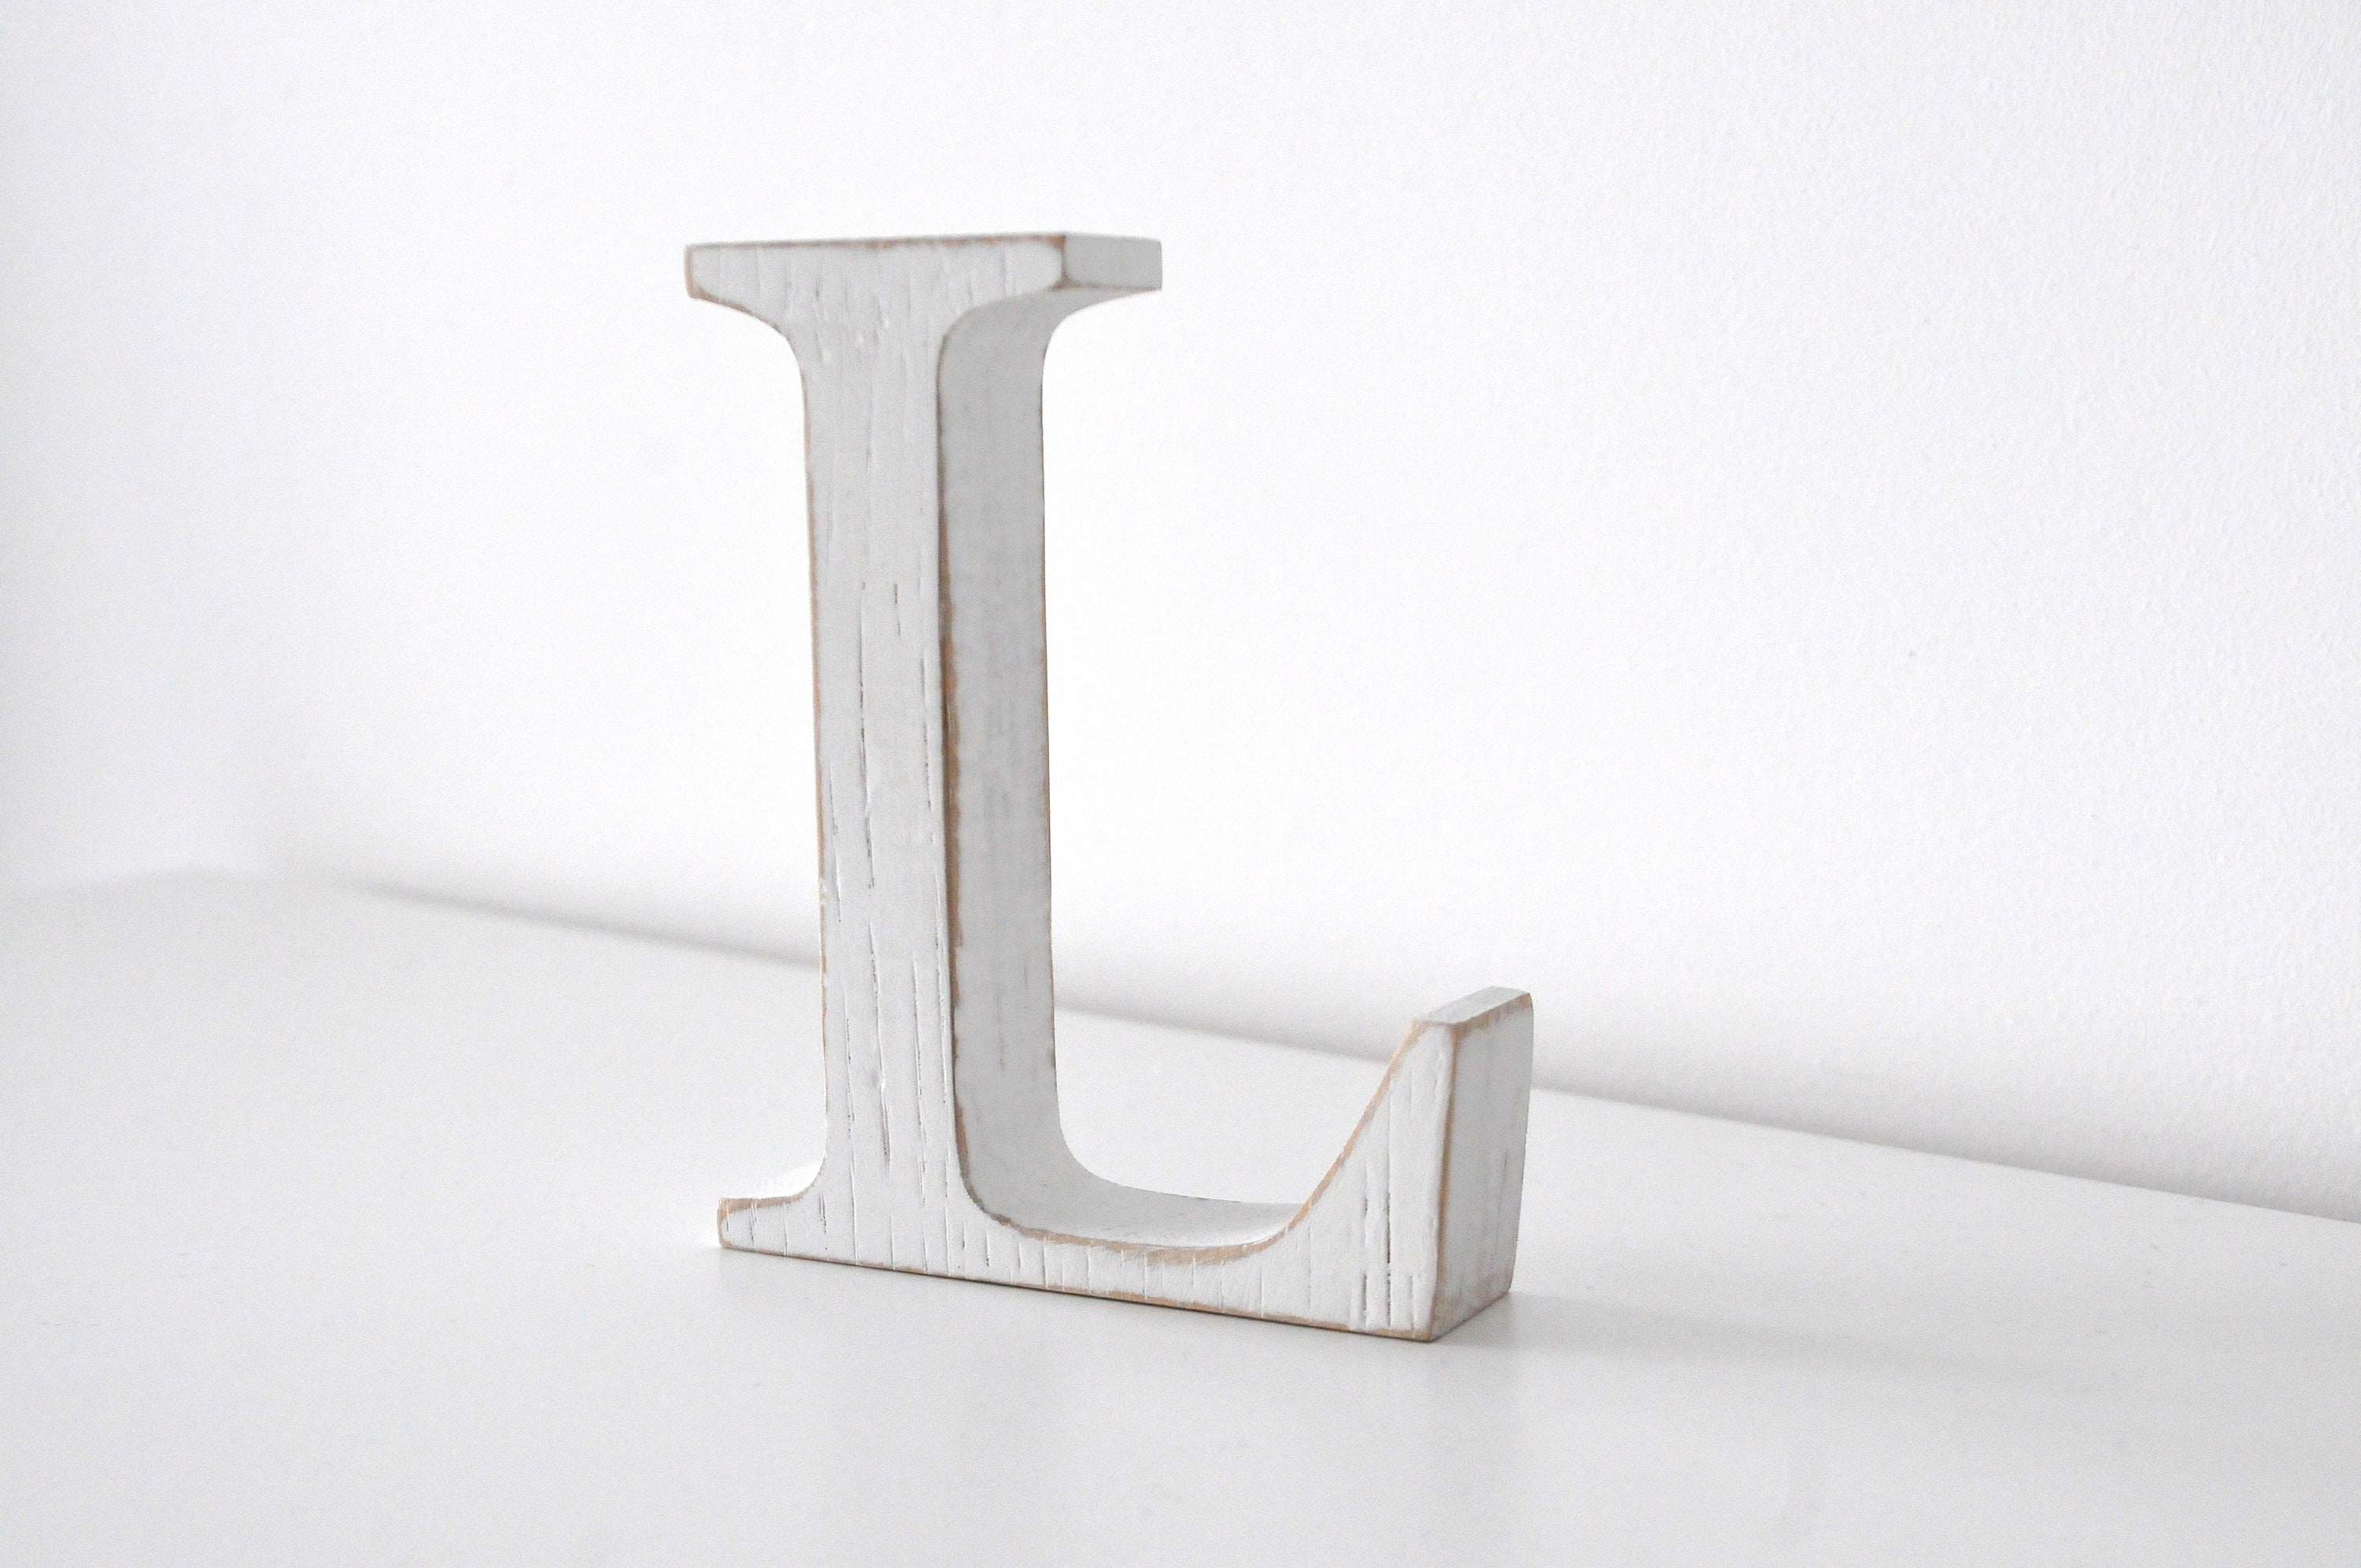 Standing Decorative Letters, Wooden Letters for Shelf, Custom